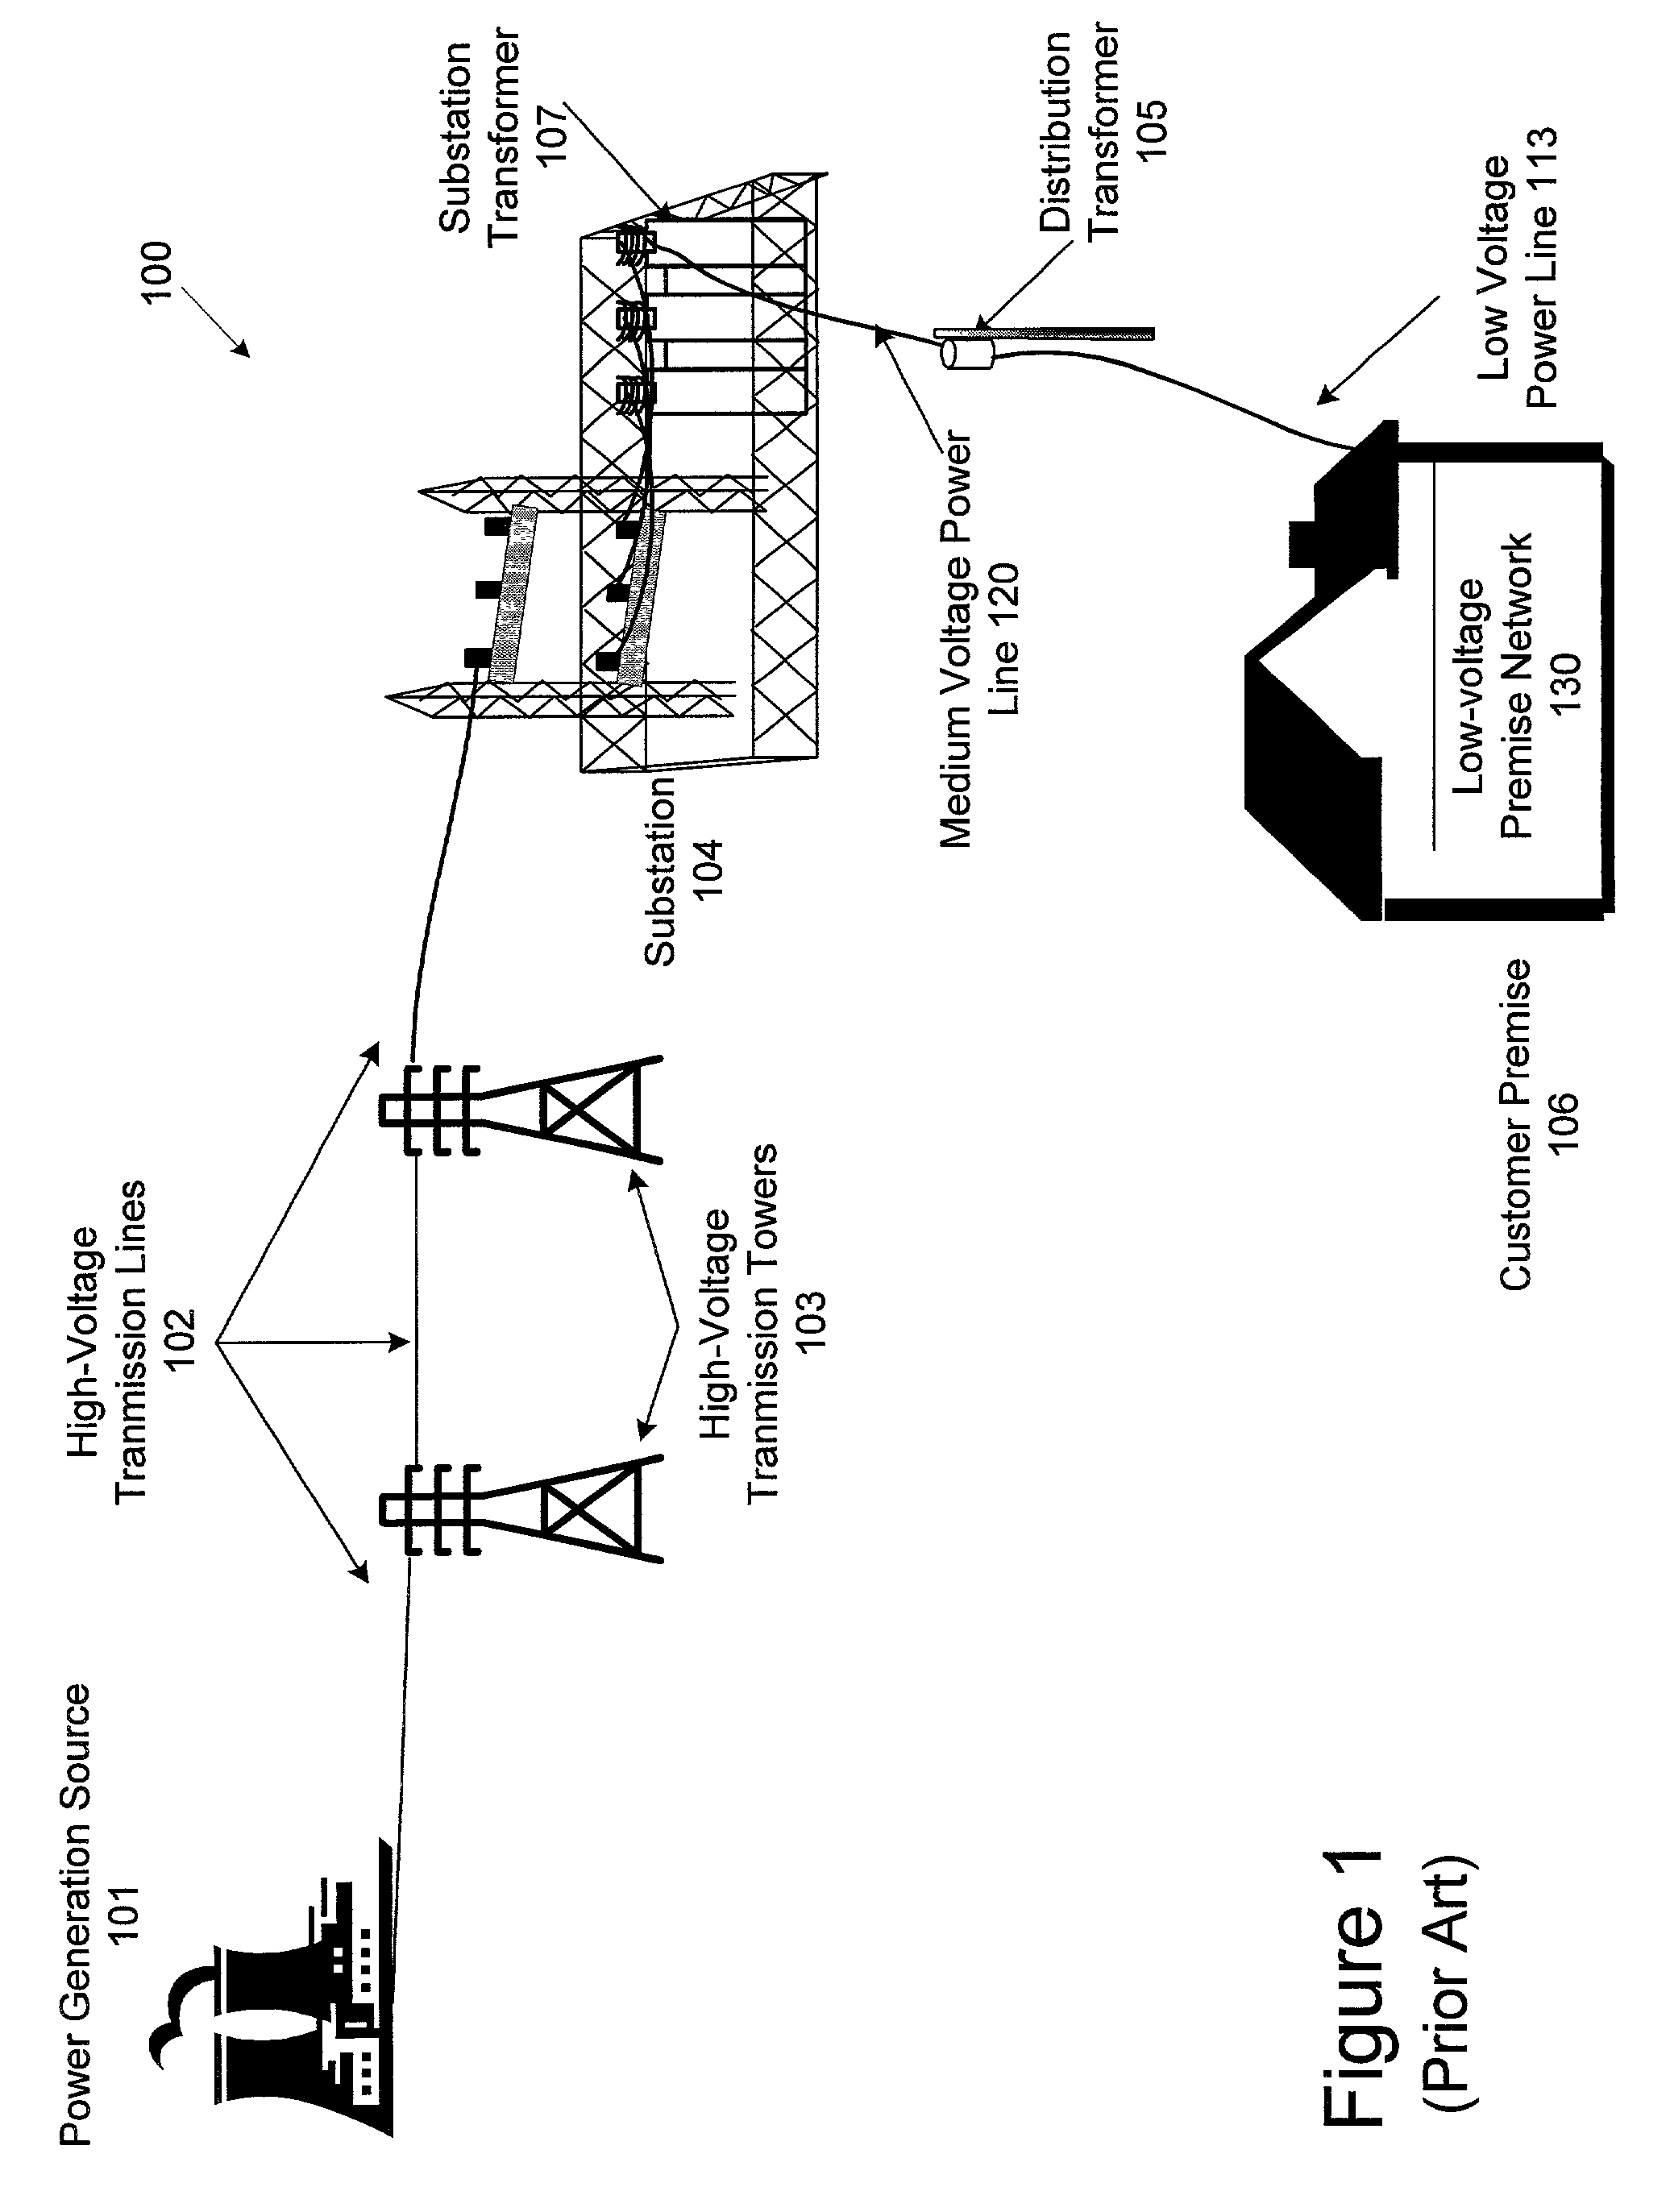 Data communication over a power line